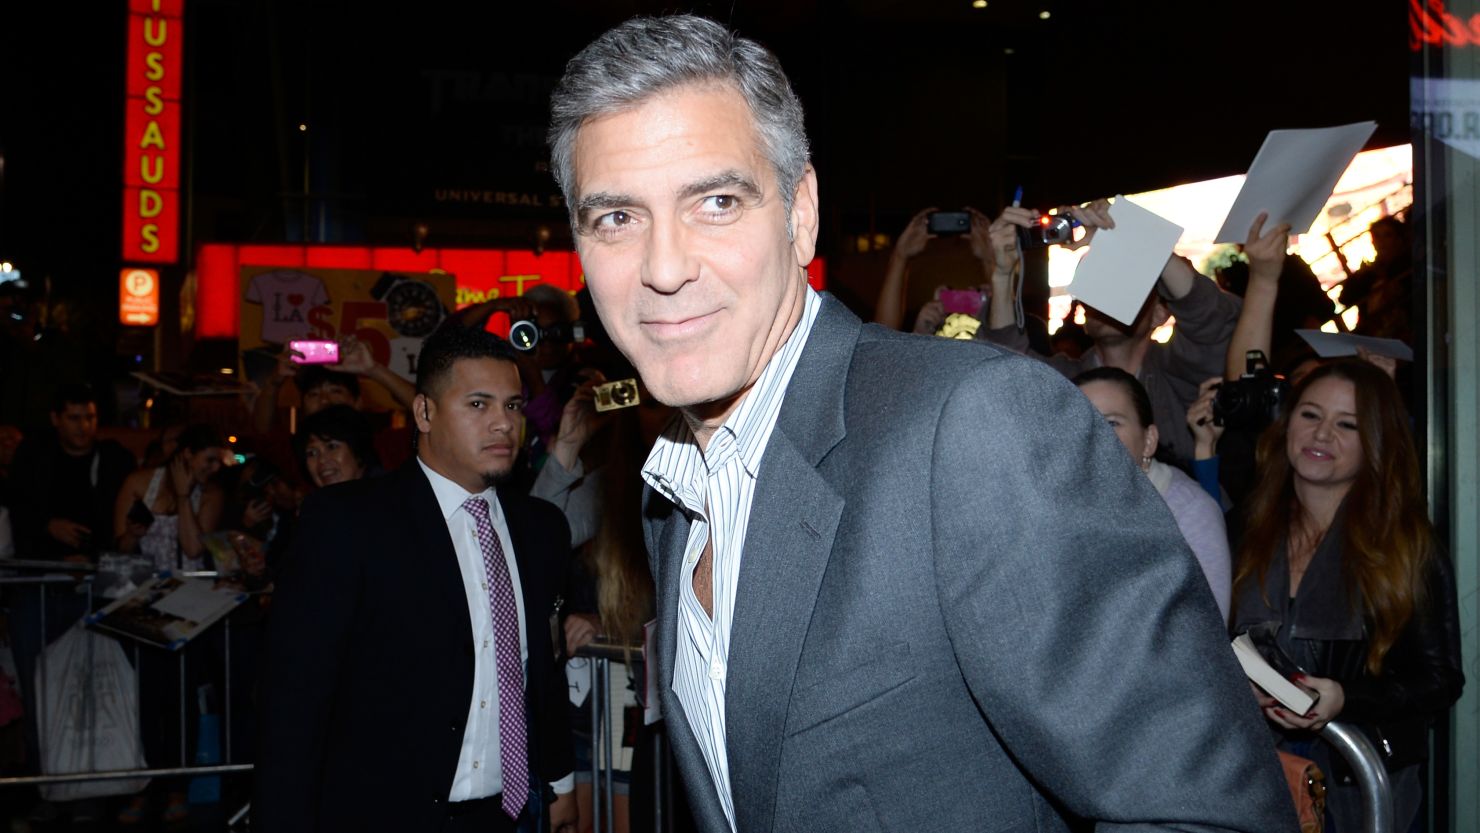 Clooney is a rare public figure with the credibility, courage, and magnetism, says Jeremy Barnicle.